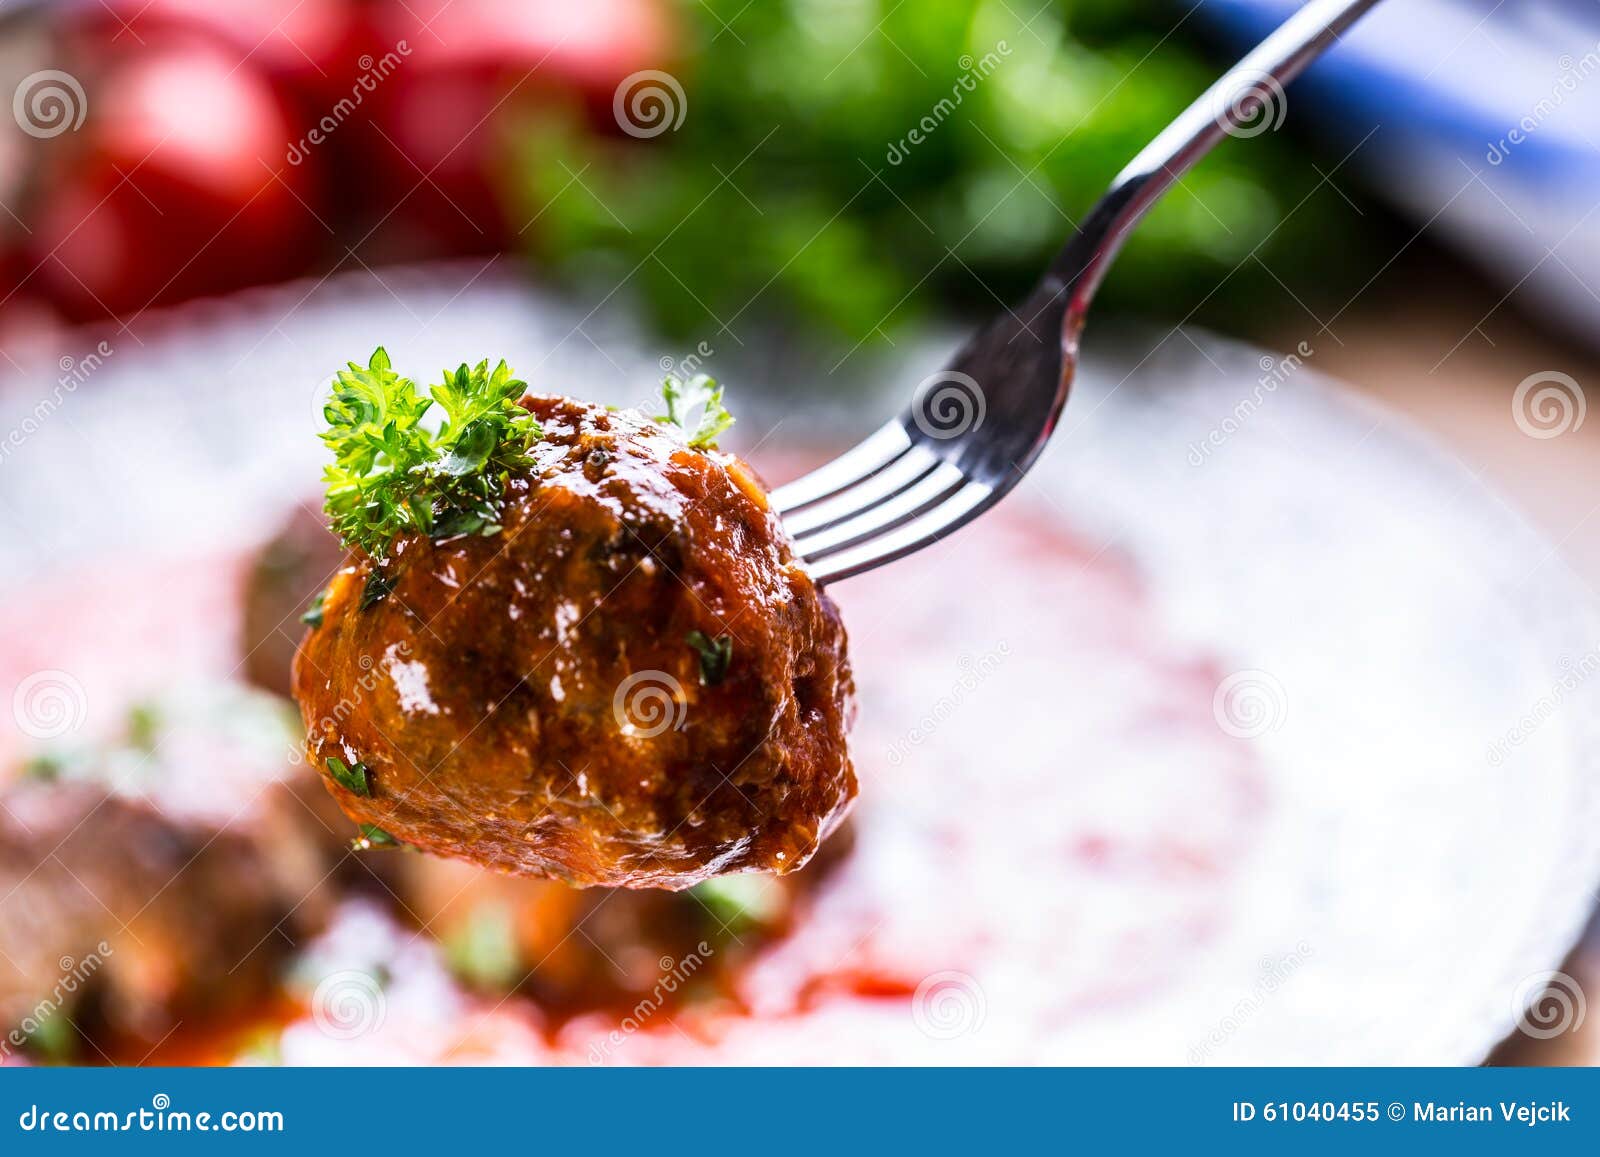 Meat Balls Italian And Mediterranean Cuisine Meat Balls With S Stock